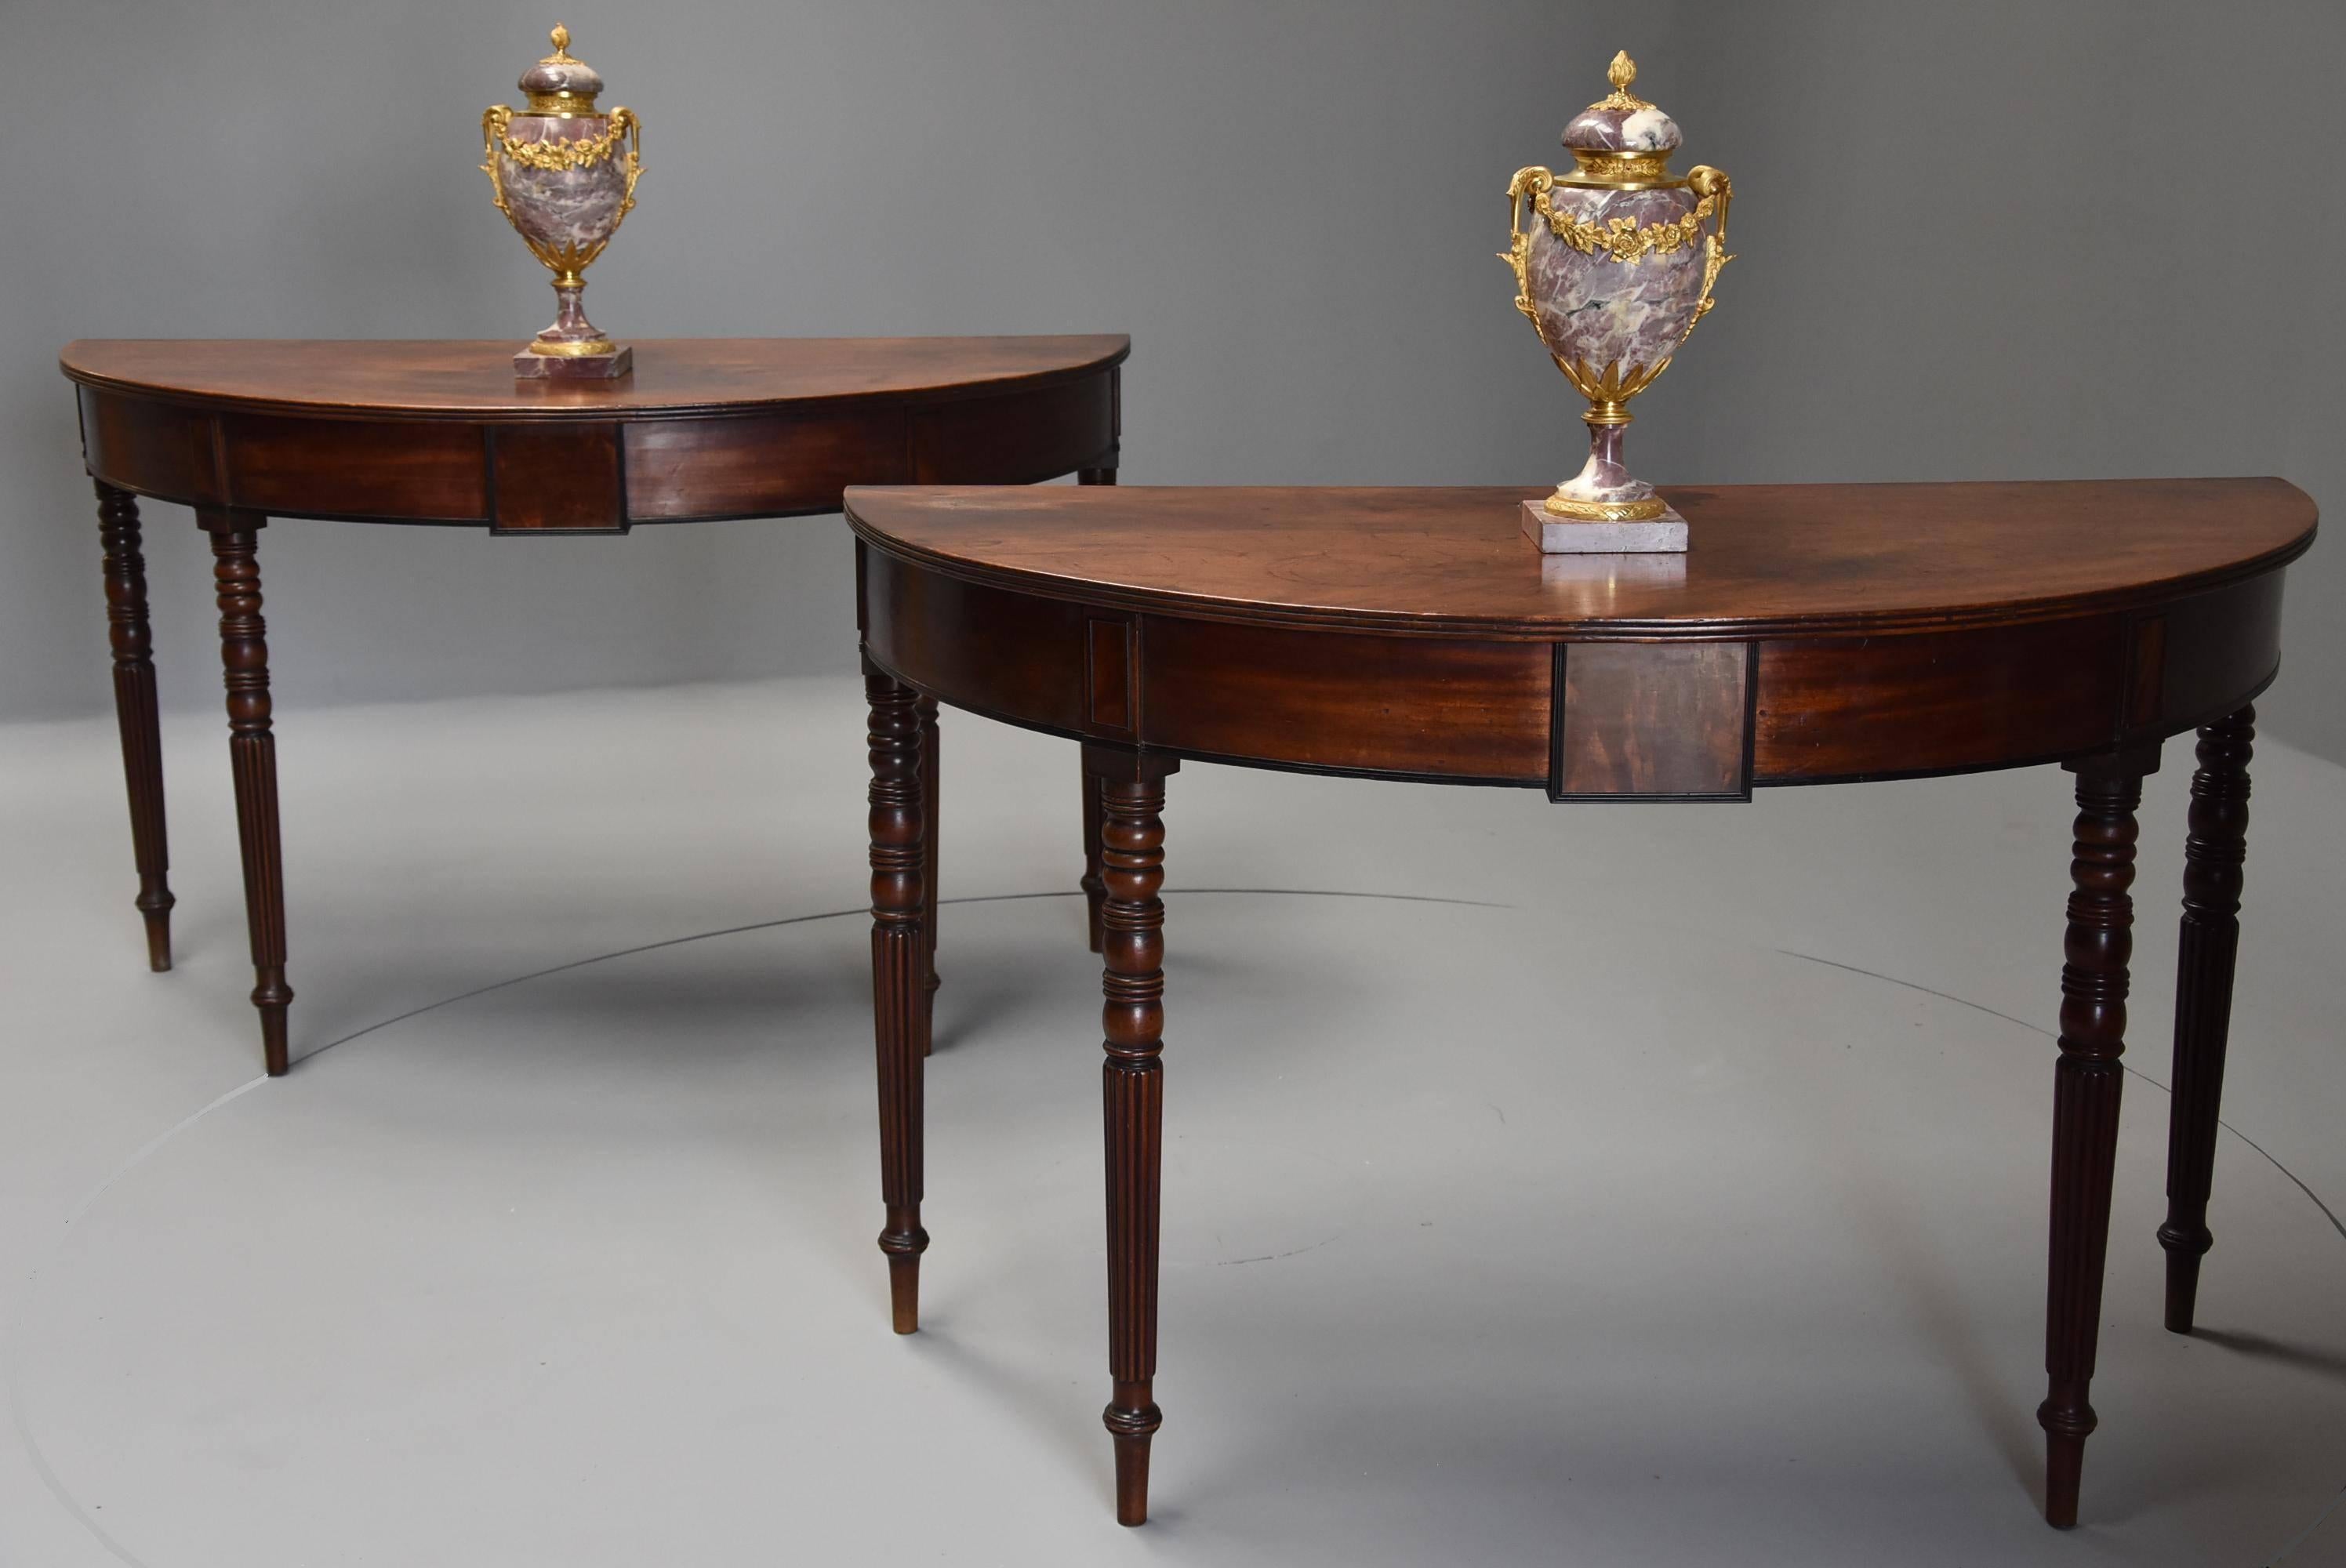 Regency Pair of Good Quality Early 19th Century Mahogany Demilune Console Tables